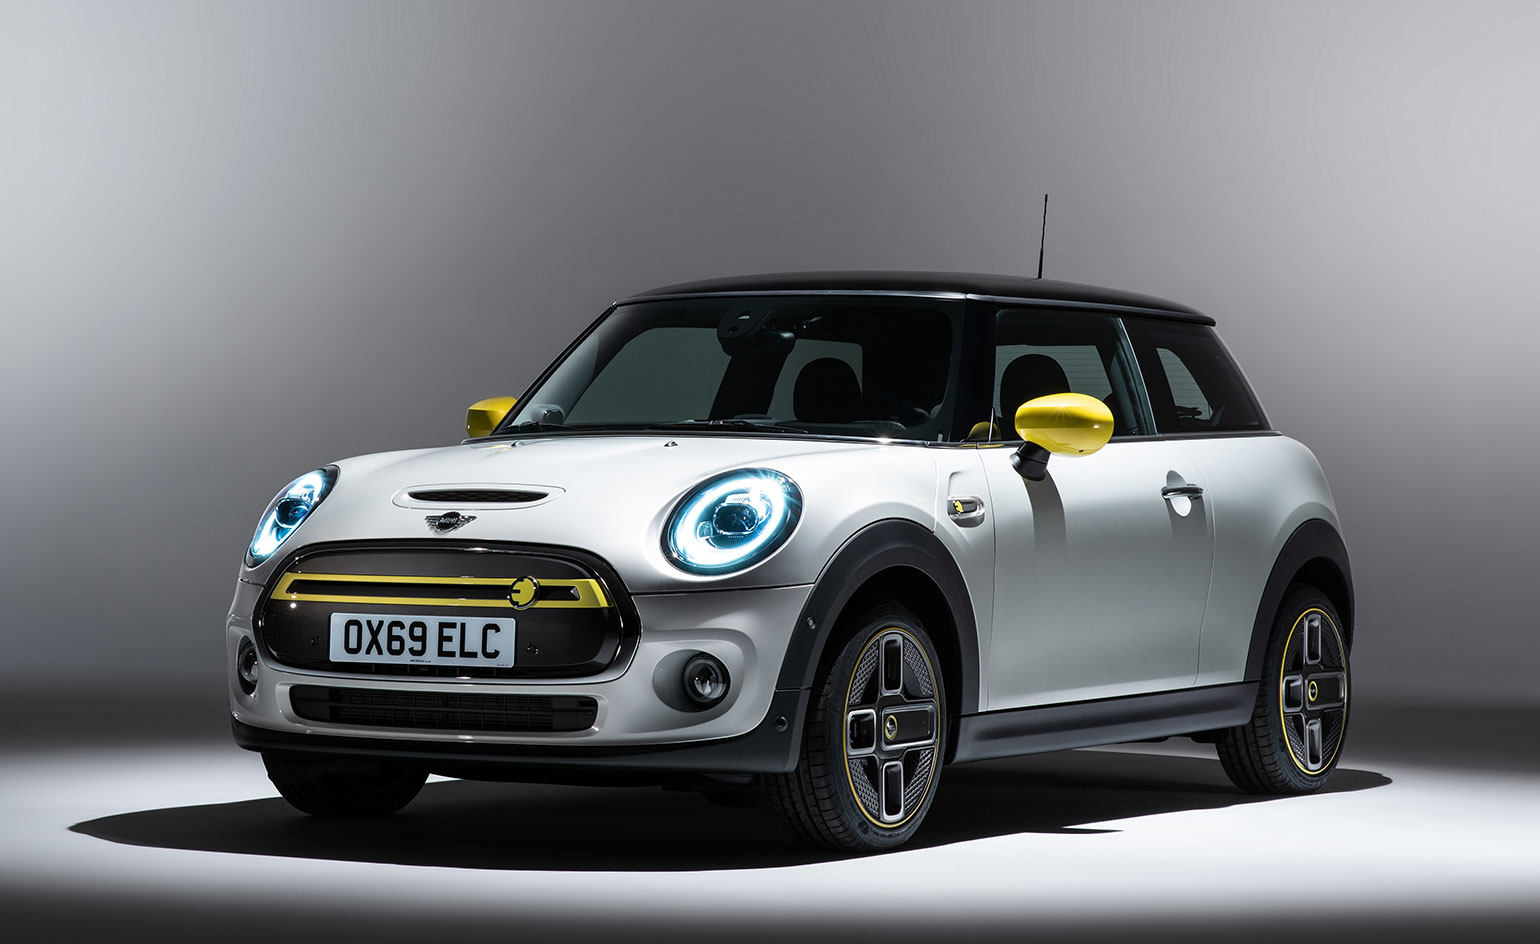 Mini Electric offers compact, sustainable urban driving